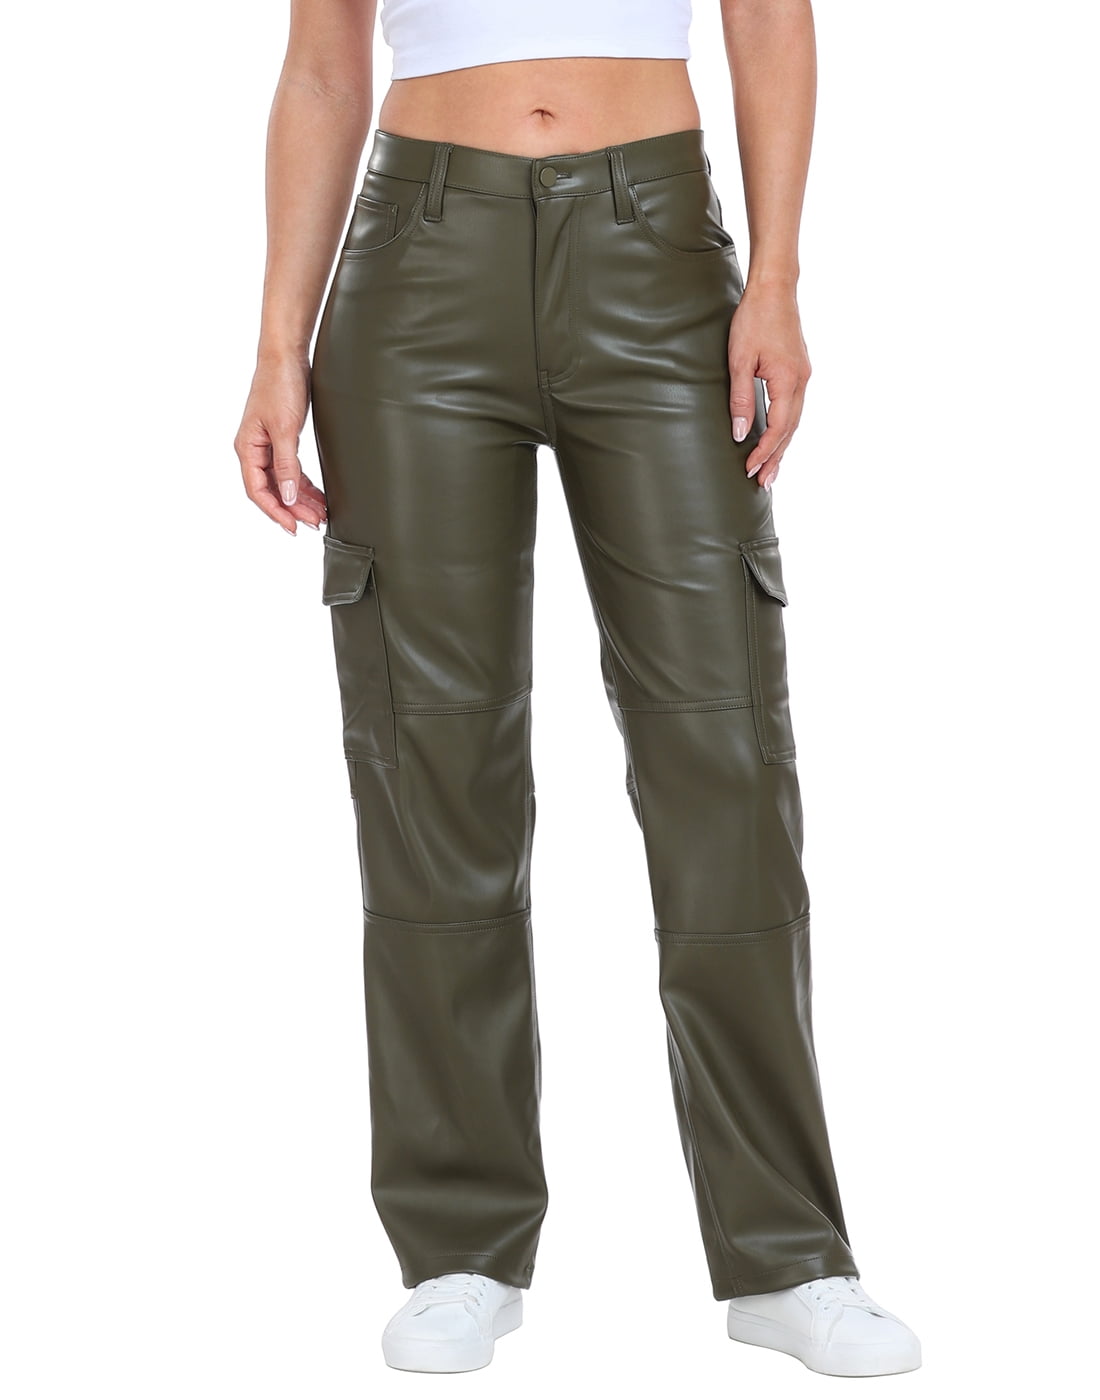 HDE Women's High Waisted Faux Leather Cargo Pants with Pockets Brown 28 